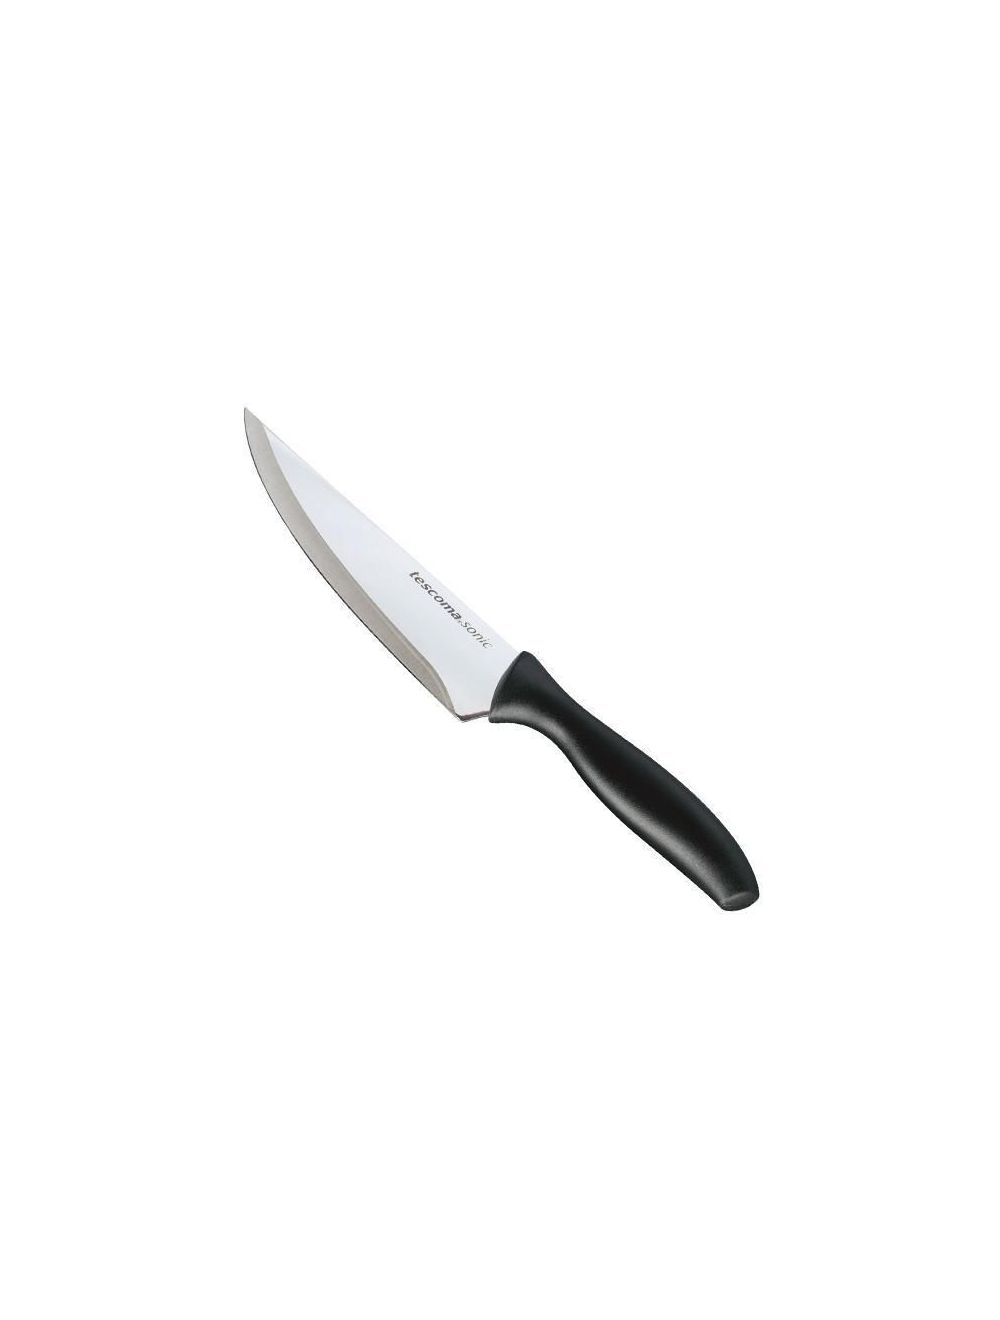 Tescoma Sonic Cook's Knife 14 cm